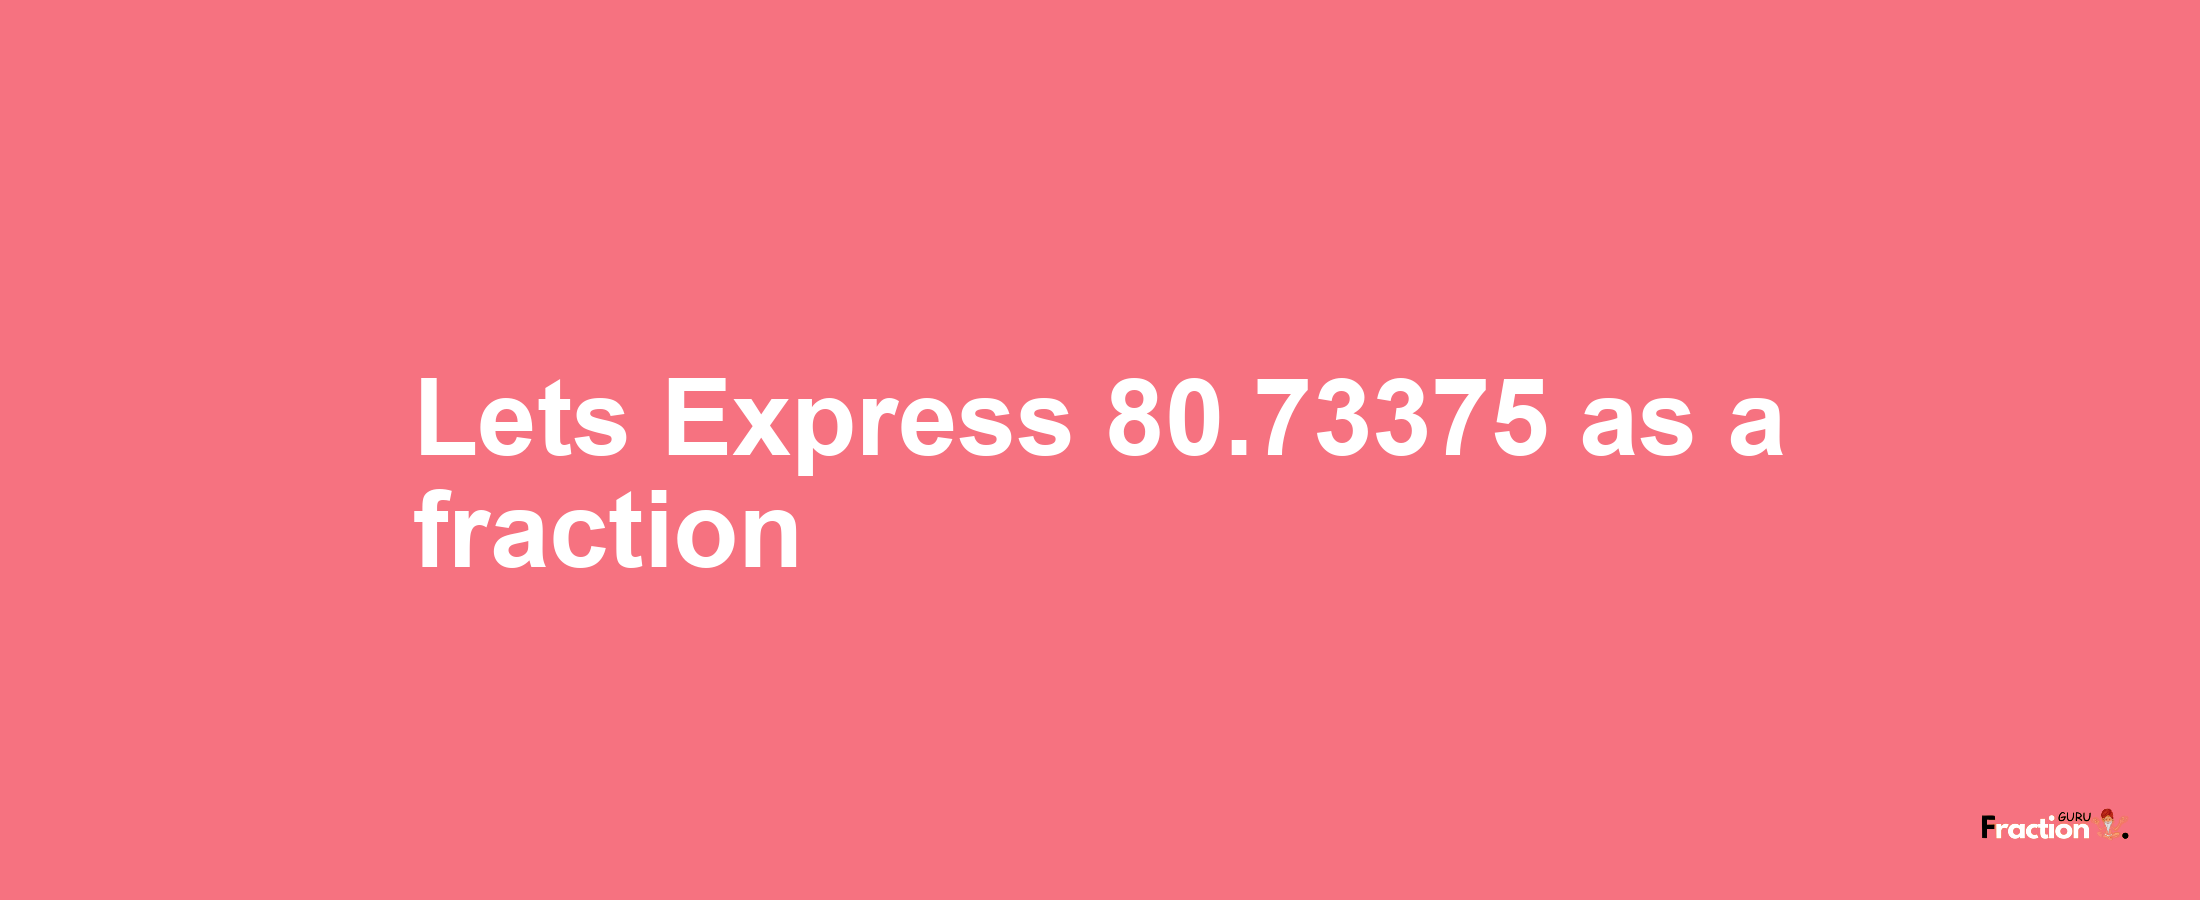 Lets Express 80.73375 as afraction